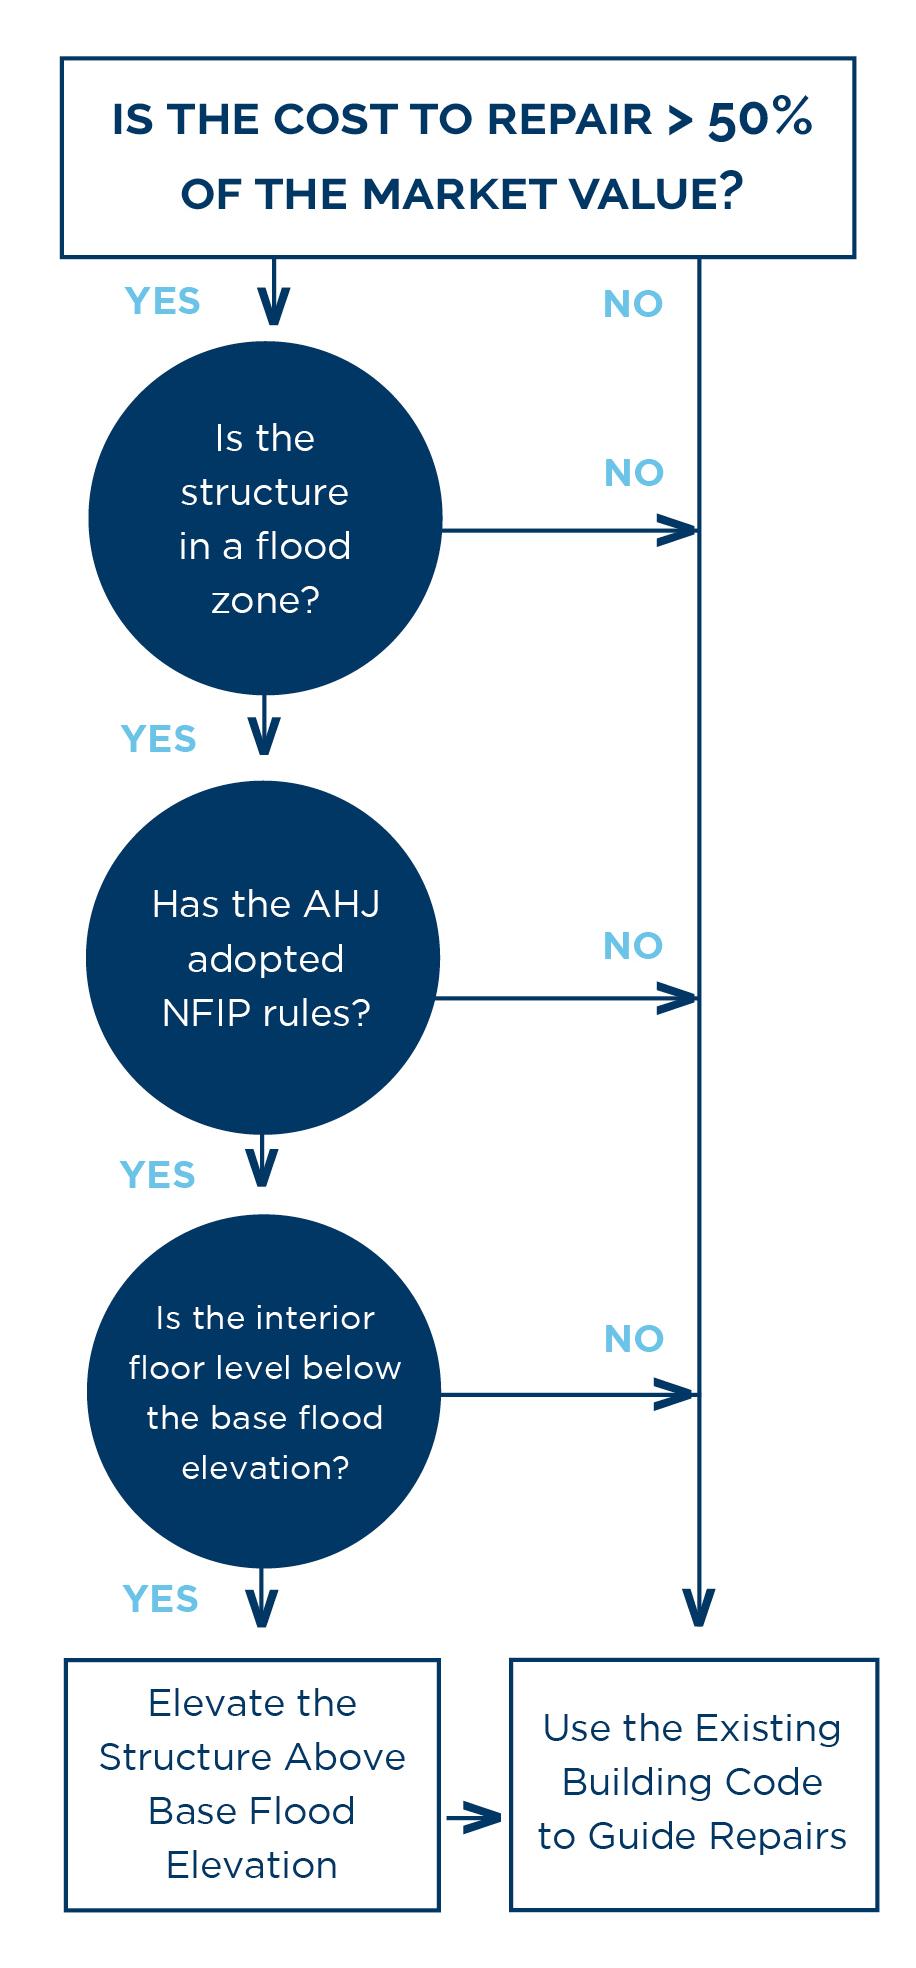 zone, the elevation of the finished floor level or the lowest horizontal member will need to be identified and compared to the minimum required flood elevation to determine compliance.